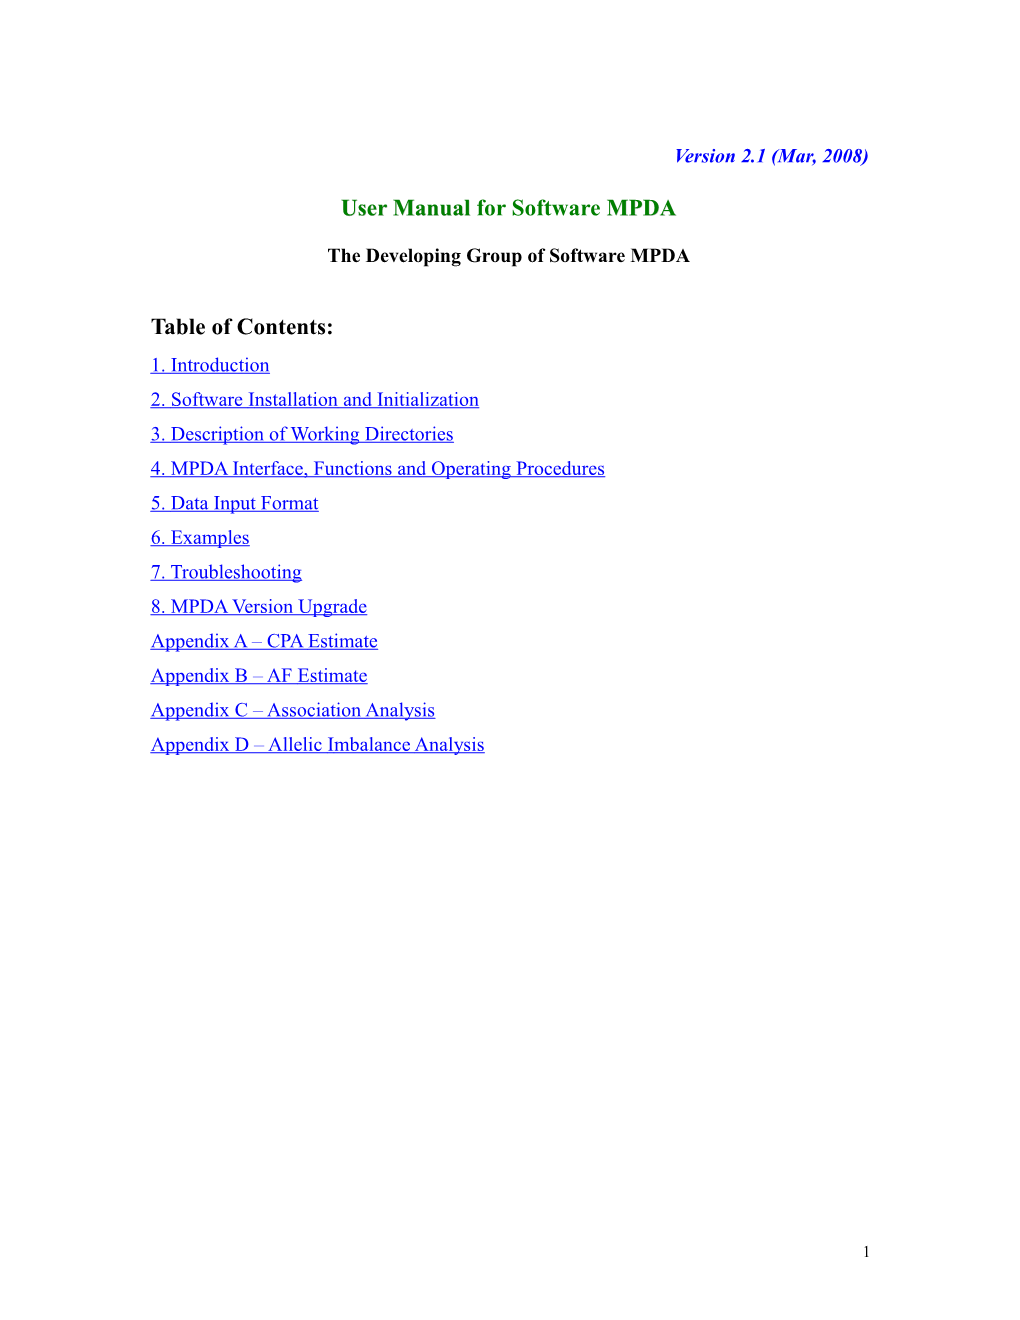 User Manual for Software MPDA